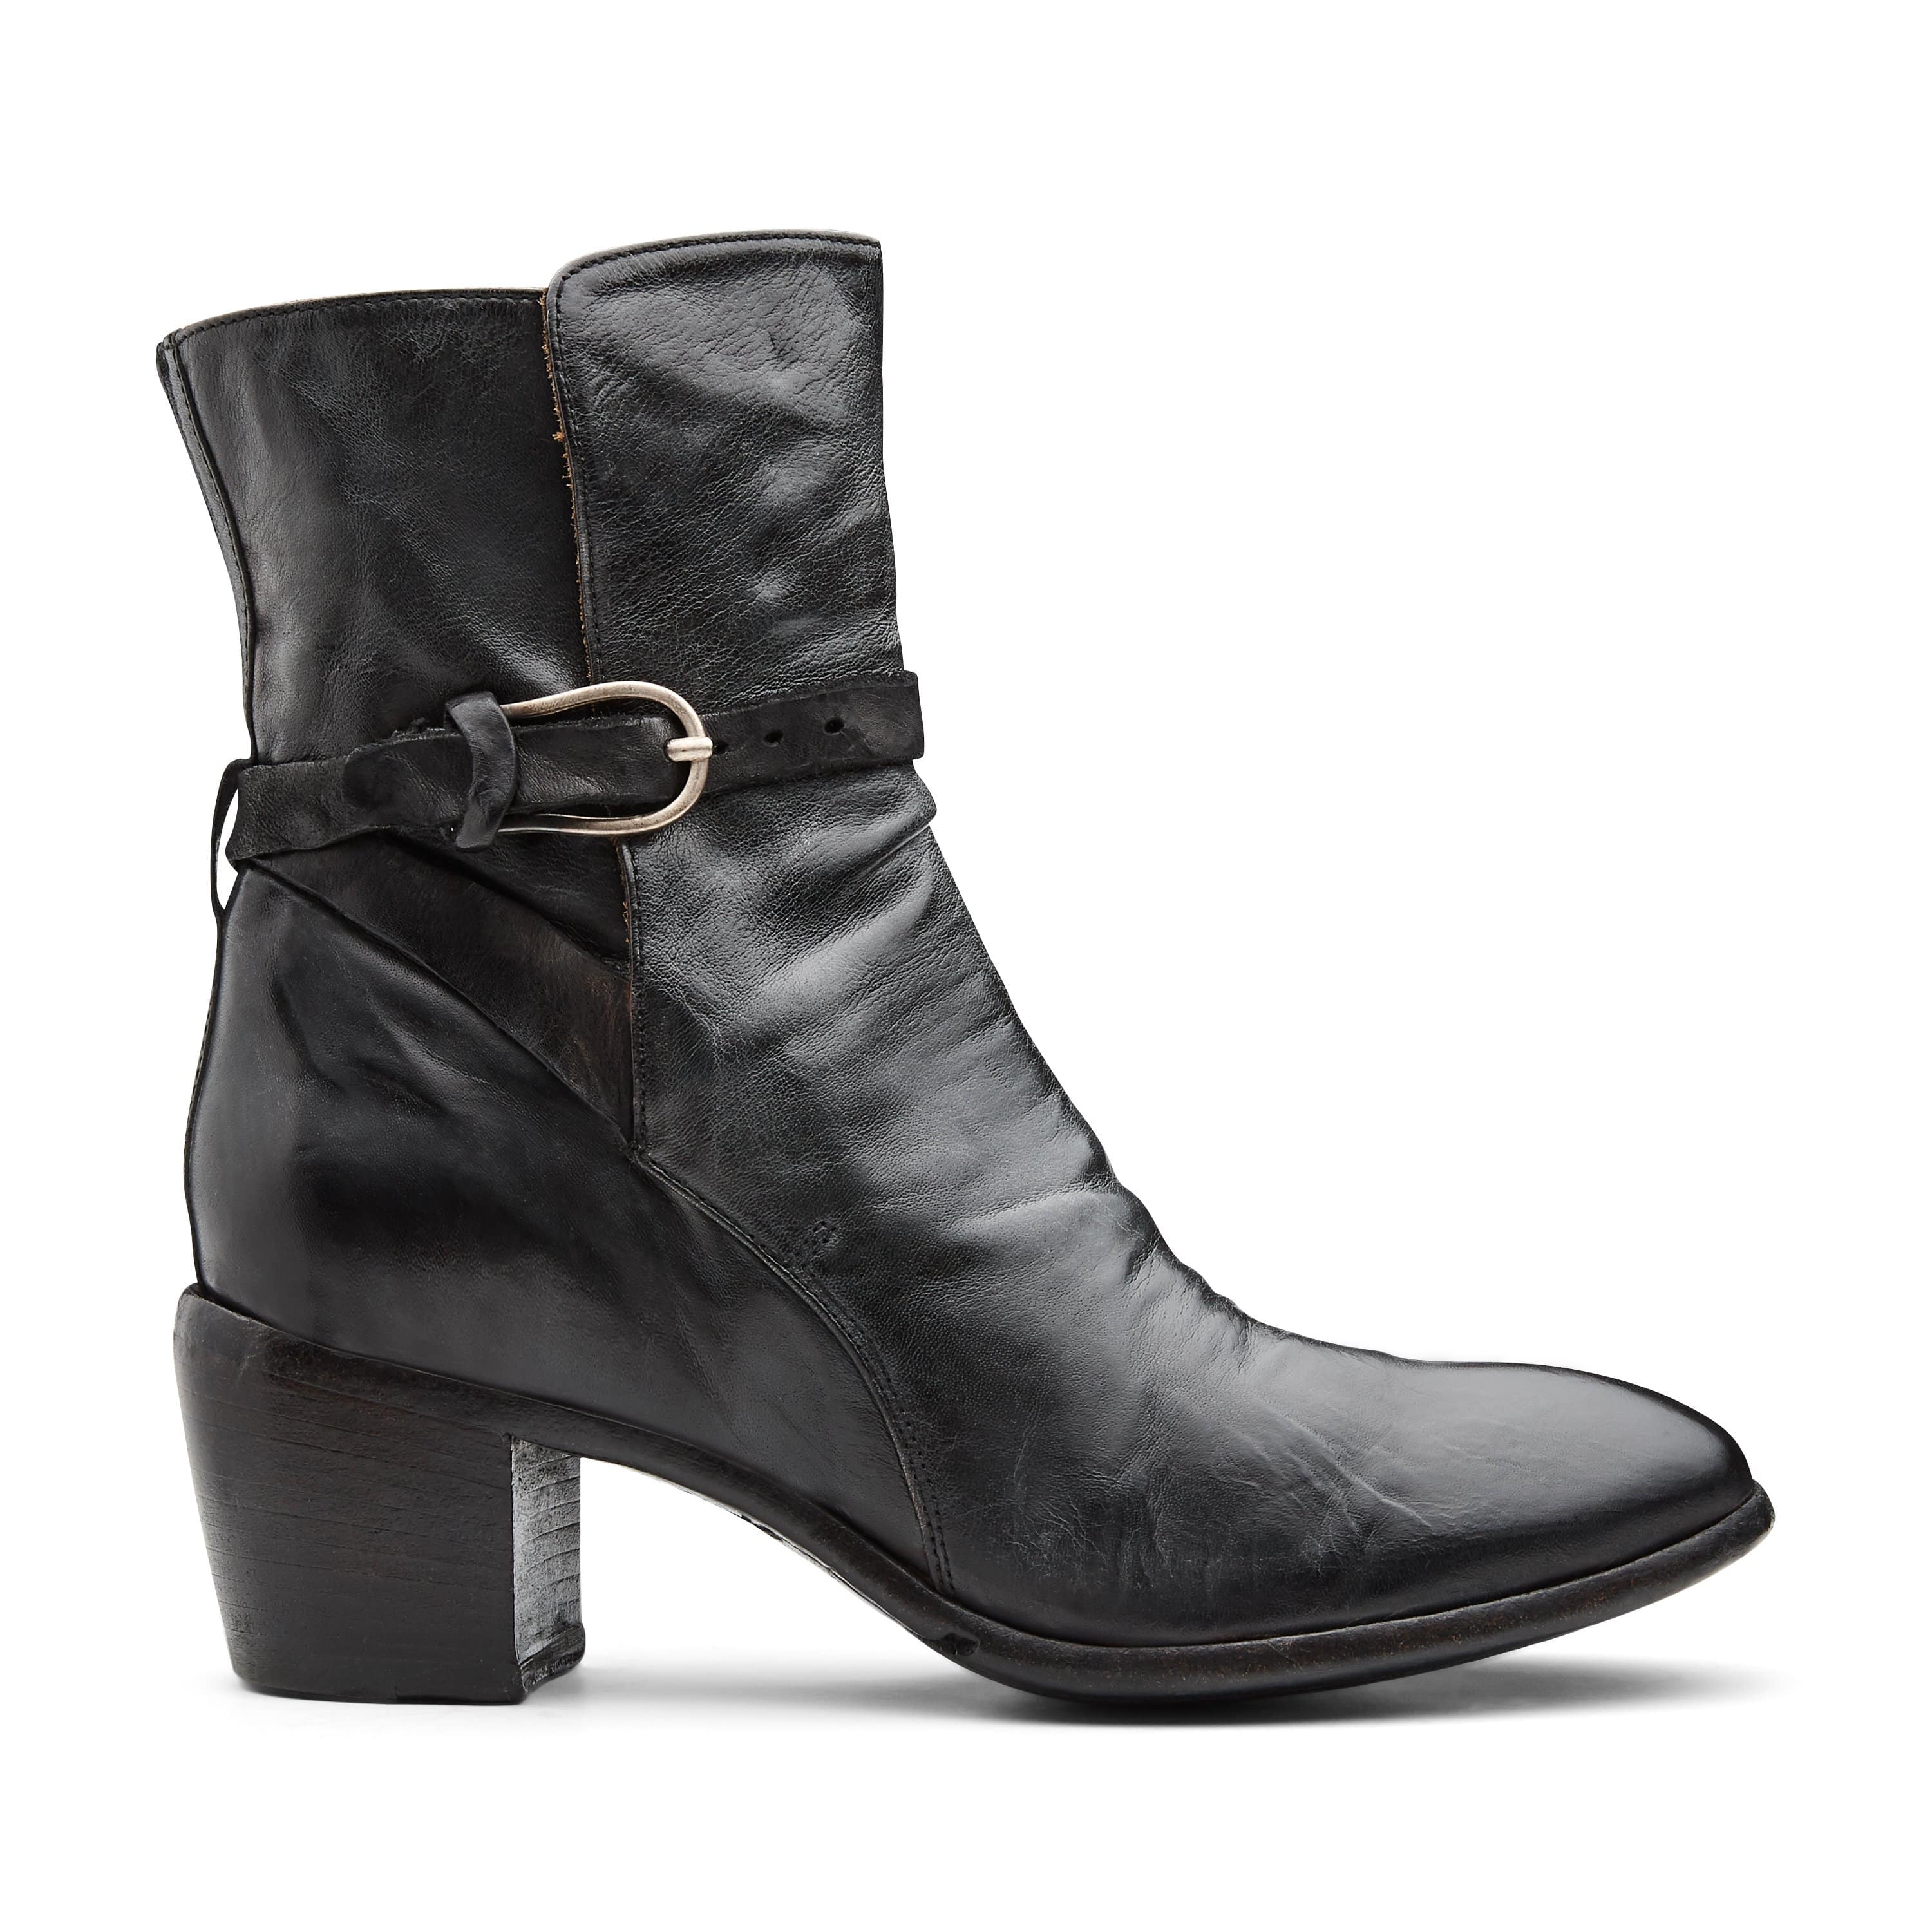 Lemargo AH06A Womens Ankle Boot - 124 Shoes